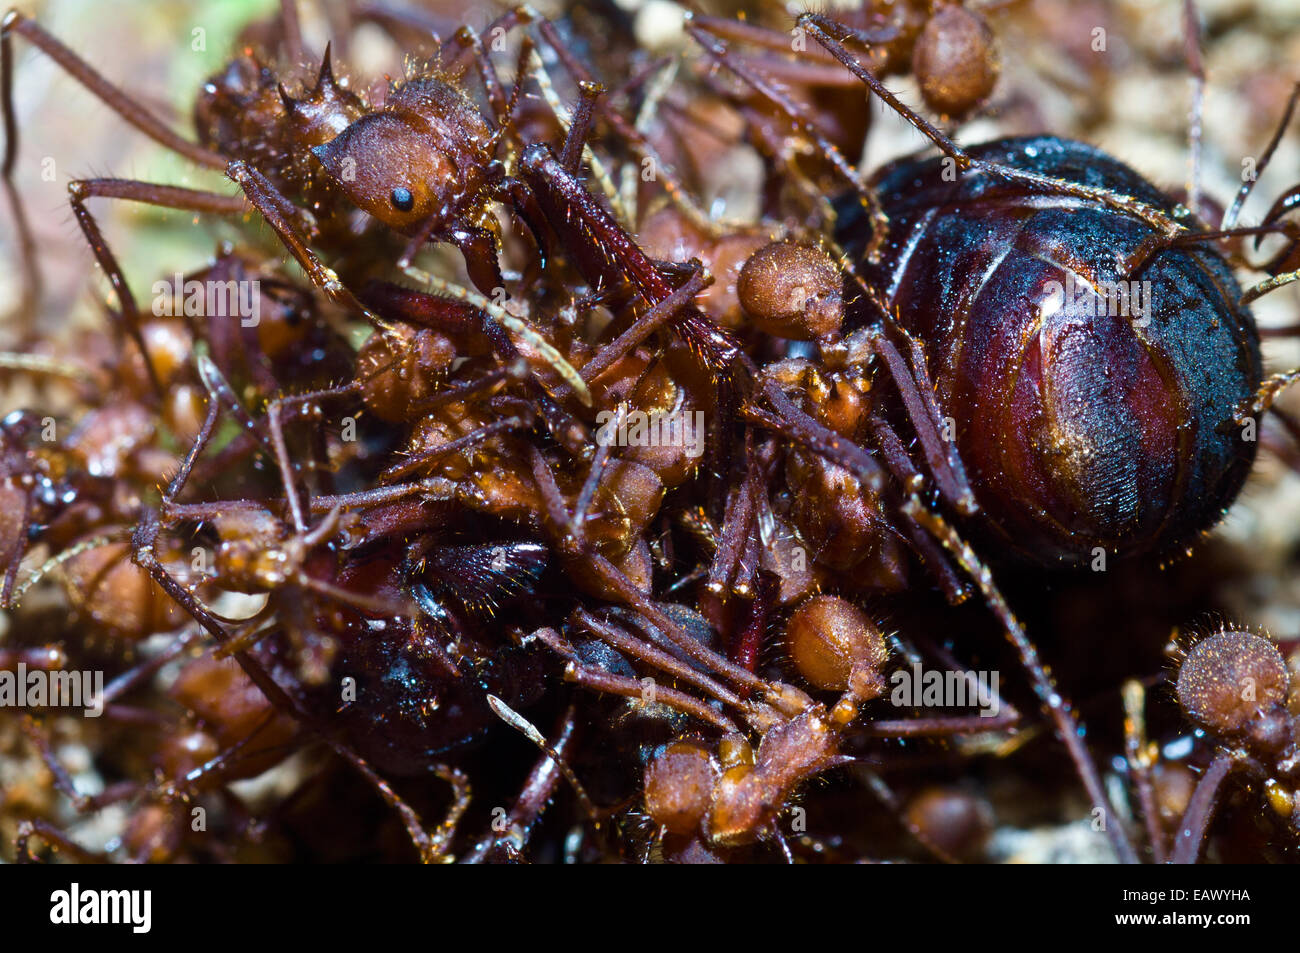 Leaf cutter ant soldiers attack and dismember a rival alate queen captured on her nuptial flight. Stock Photo